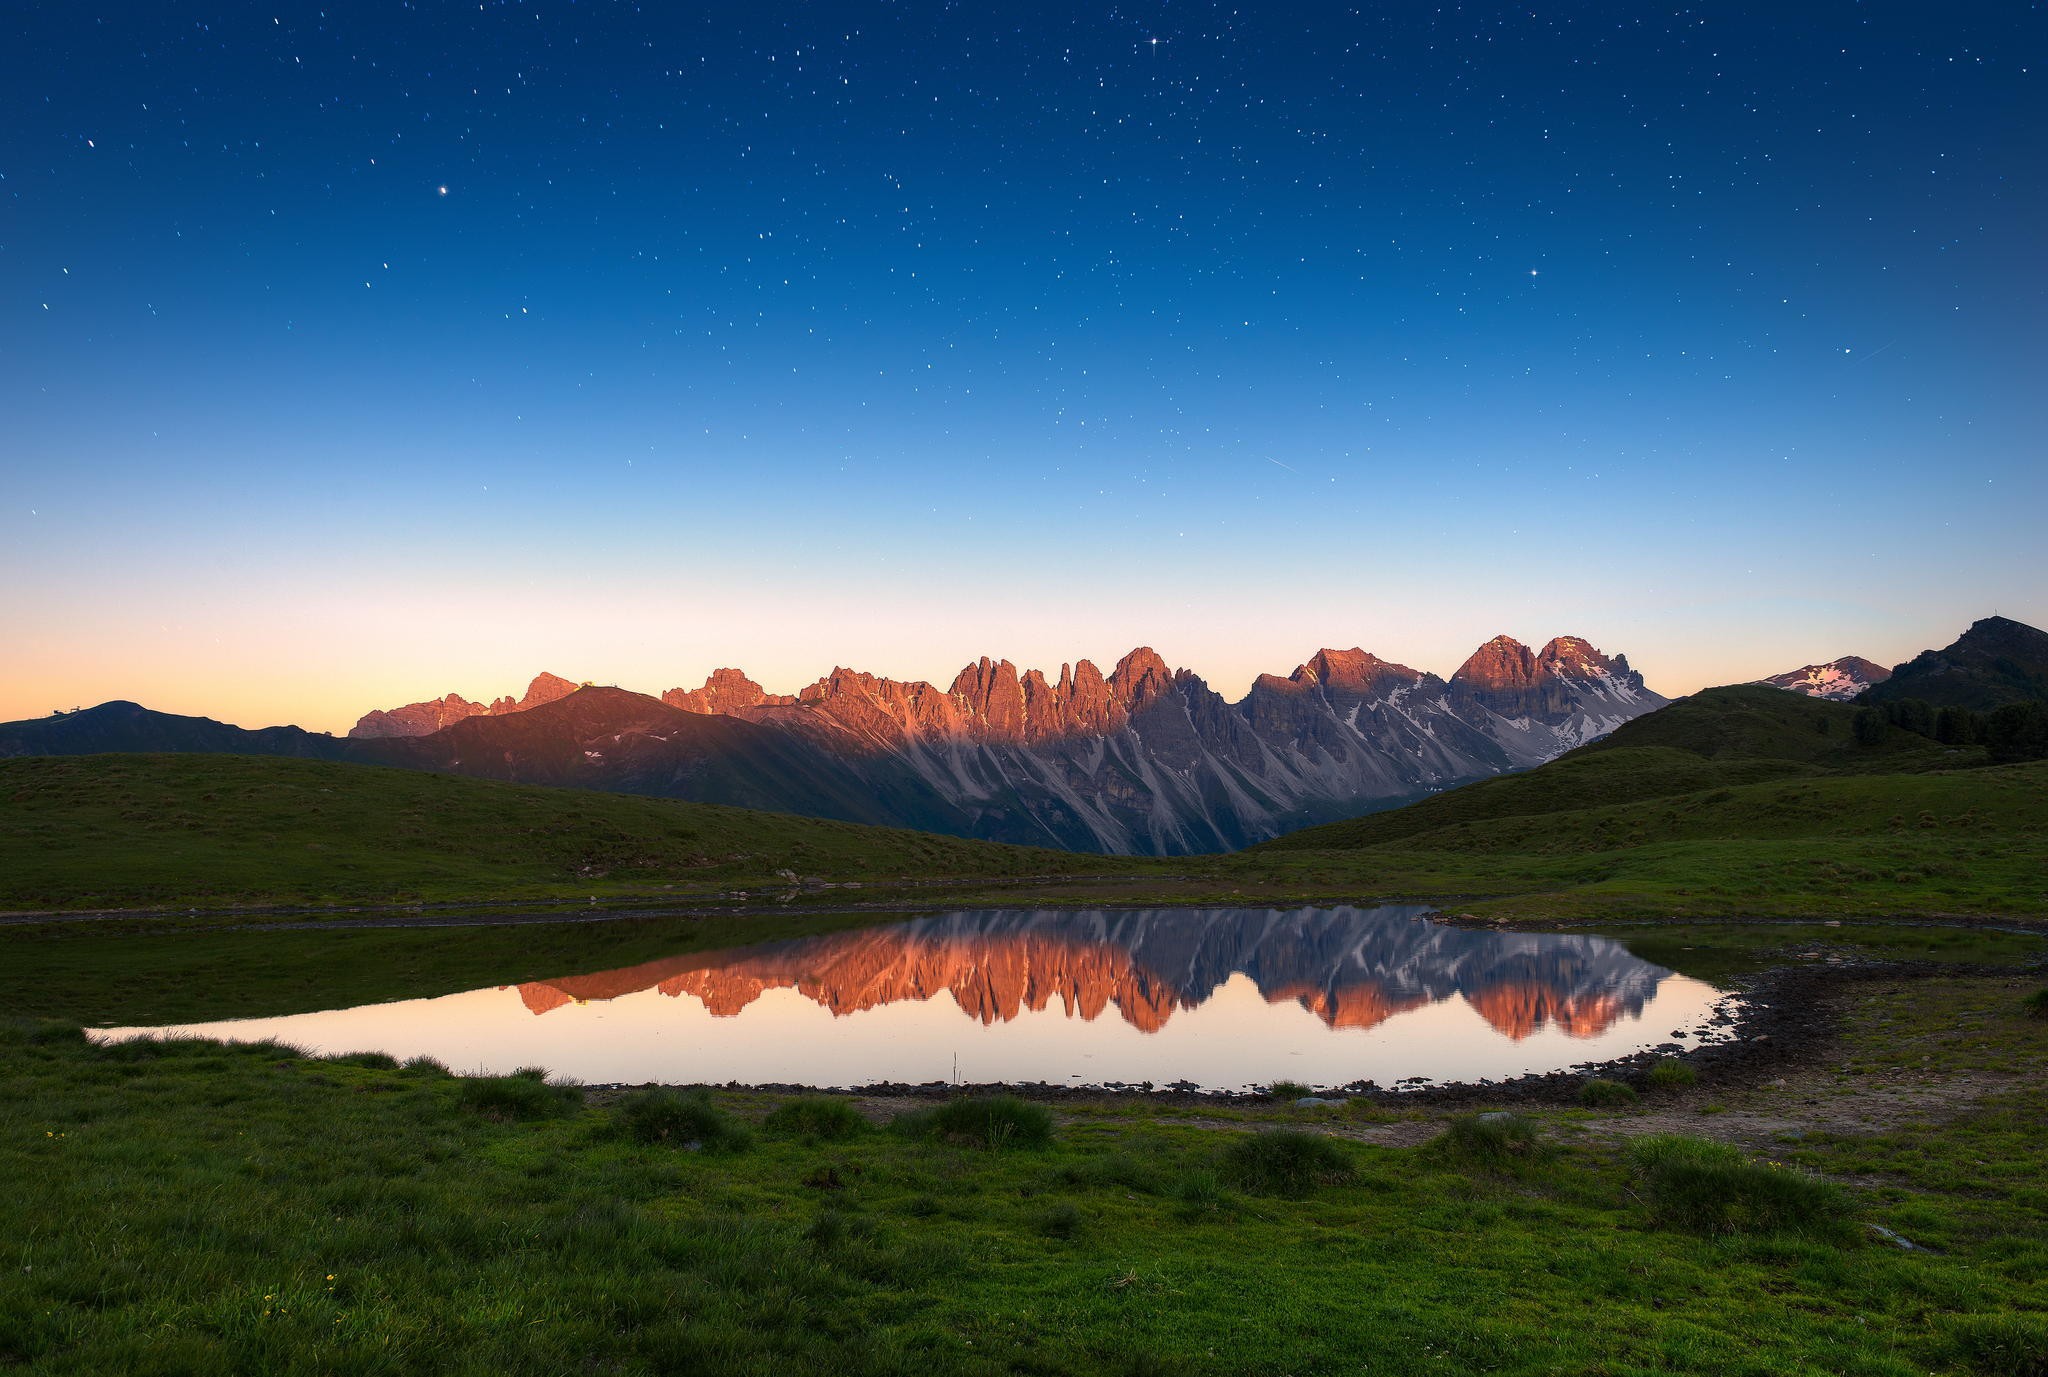 General 2048x1377 nature lake pond mountains reflection sky stars